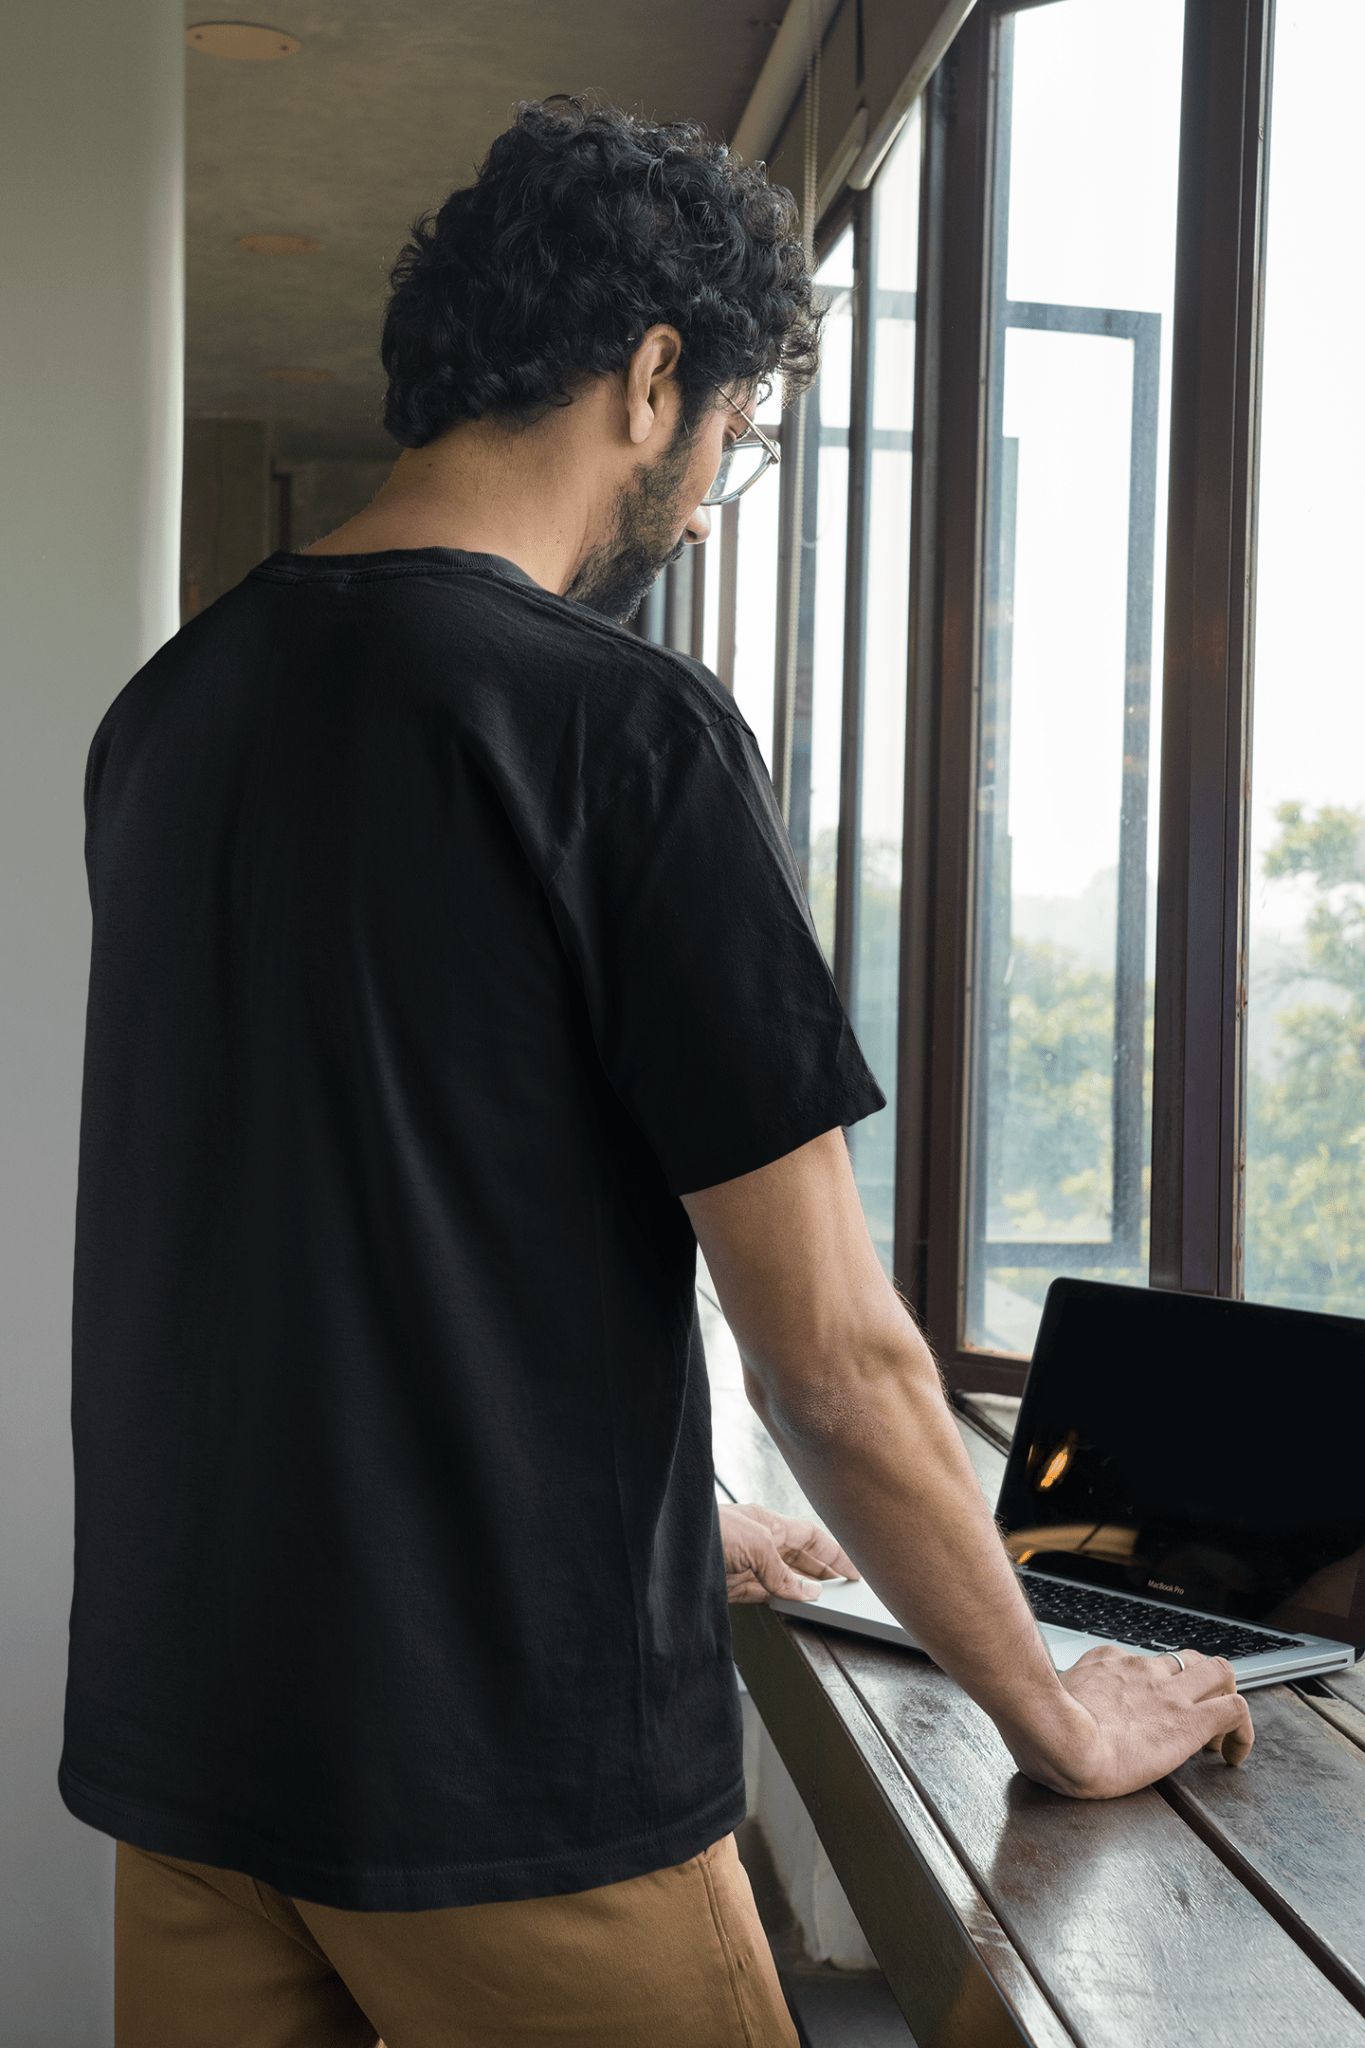 Man wearing a casual Black Tee-shirt in the office and working on a laptop.